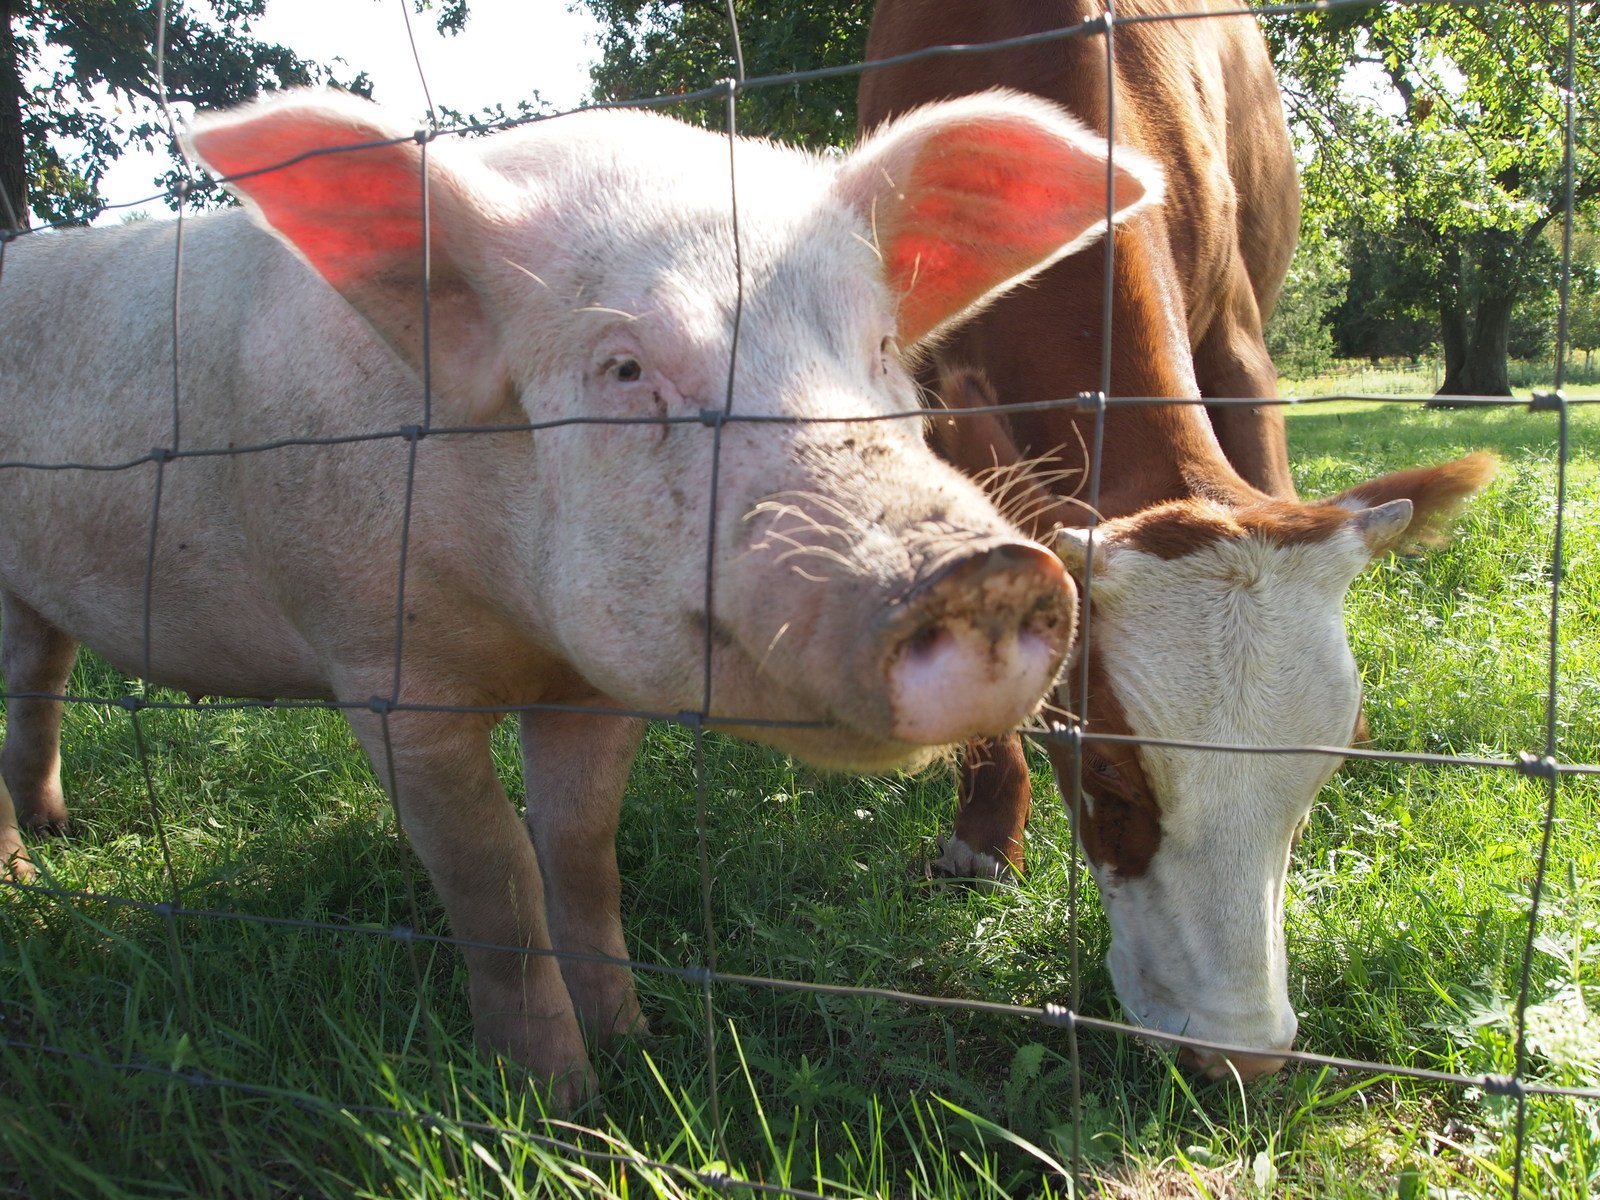 two cows in grassy field behind a wire fence